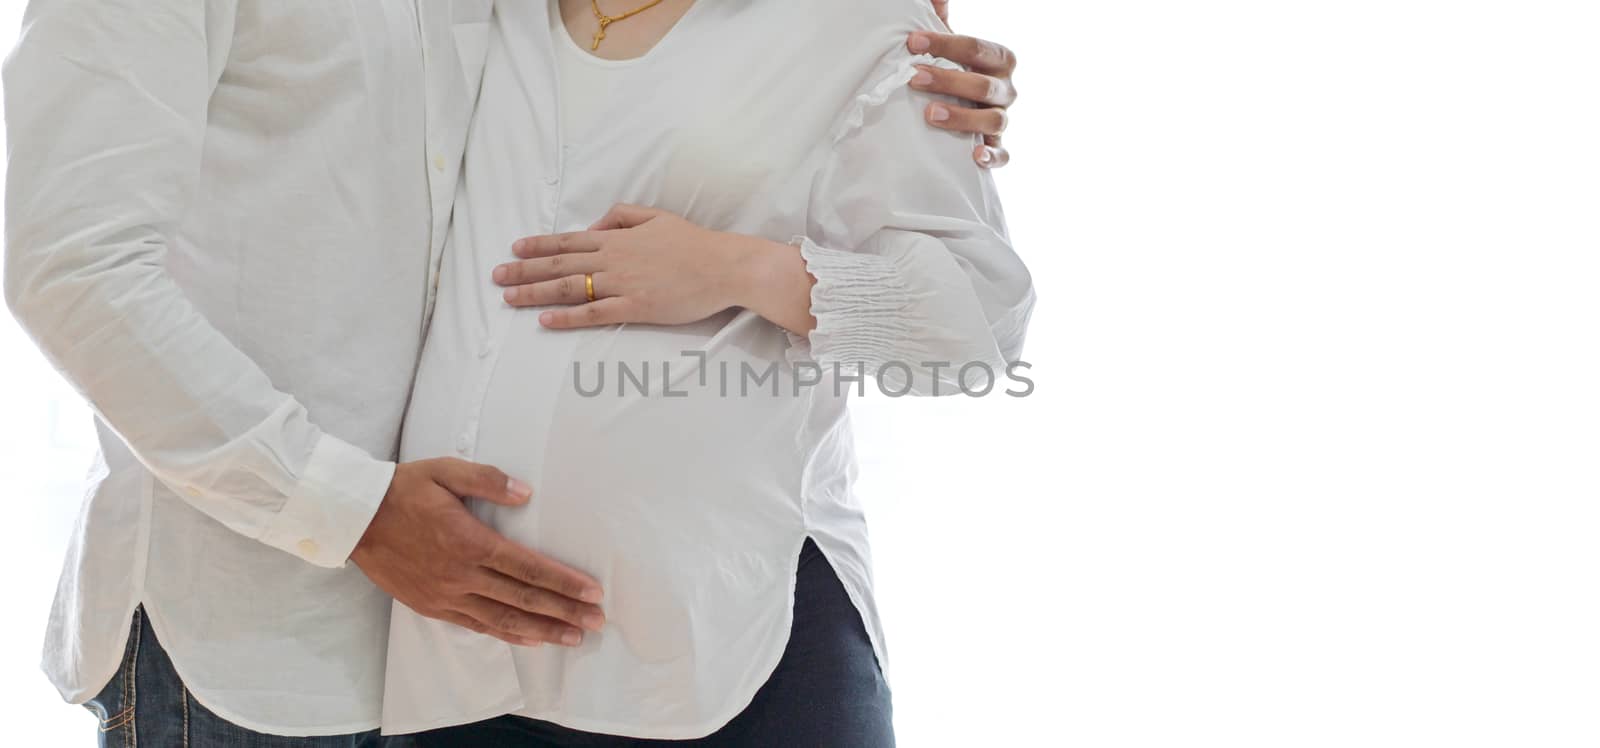 Men standing and embrace pregnant women. by poungsaed